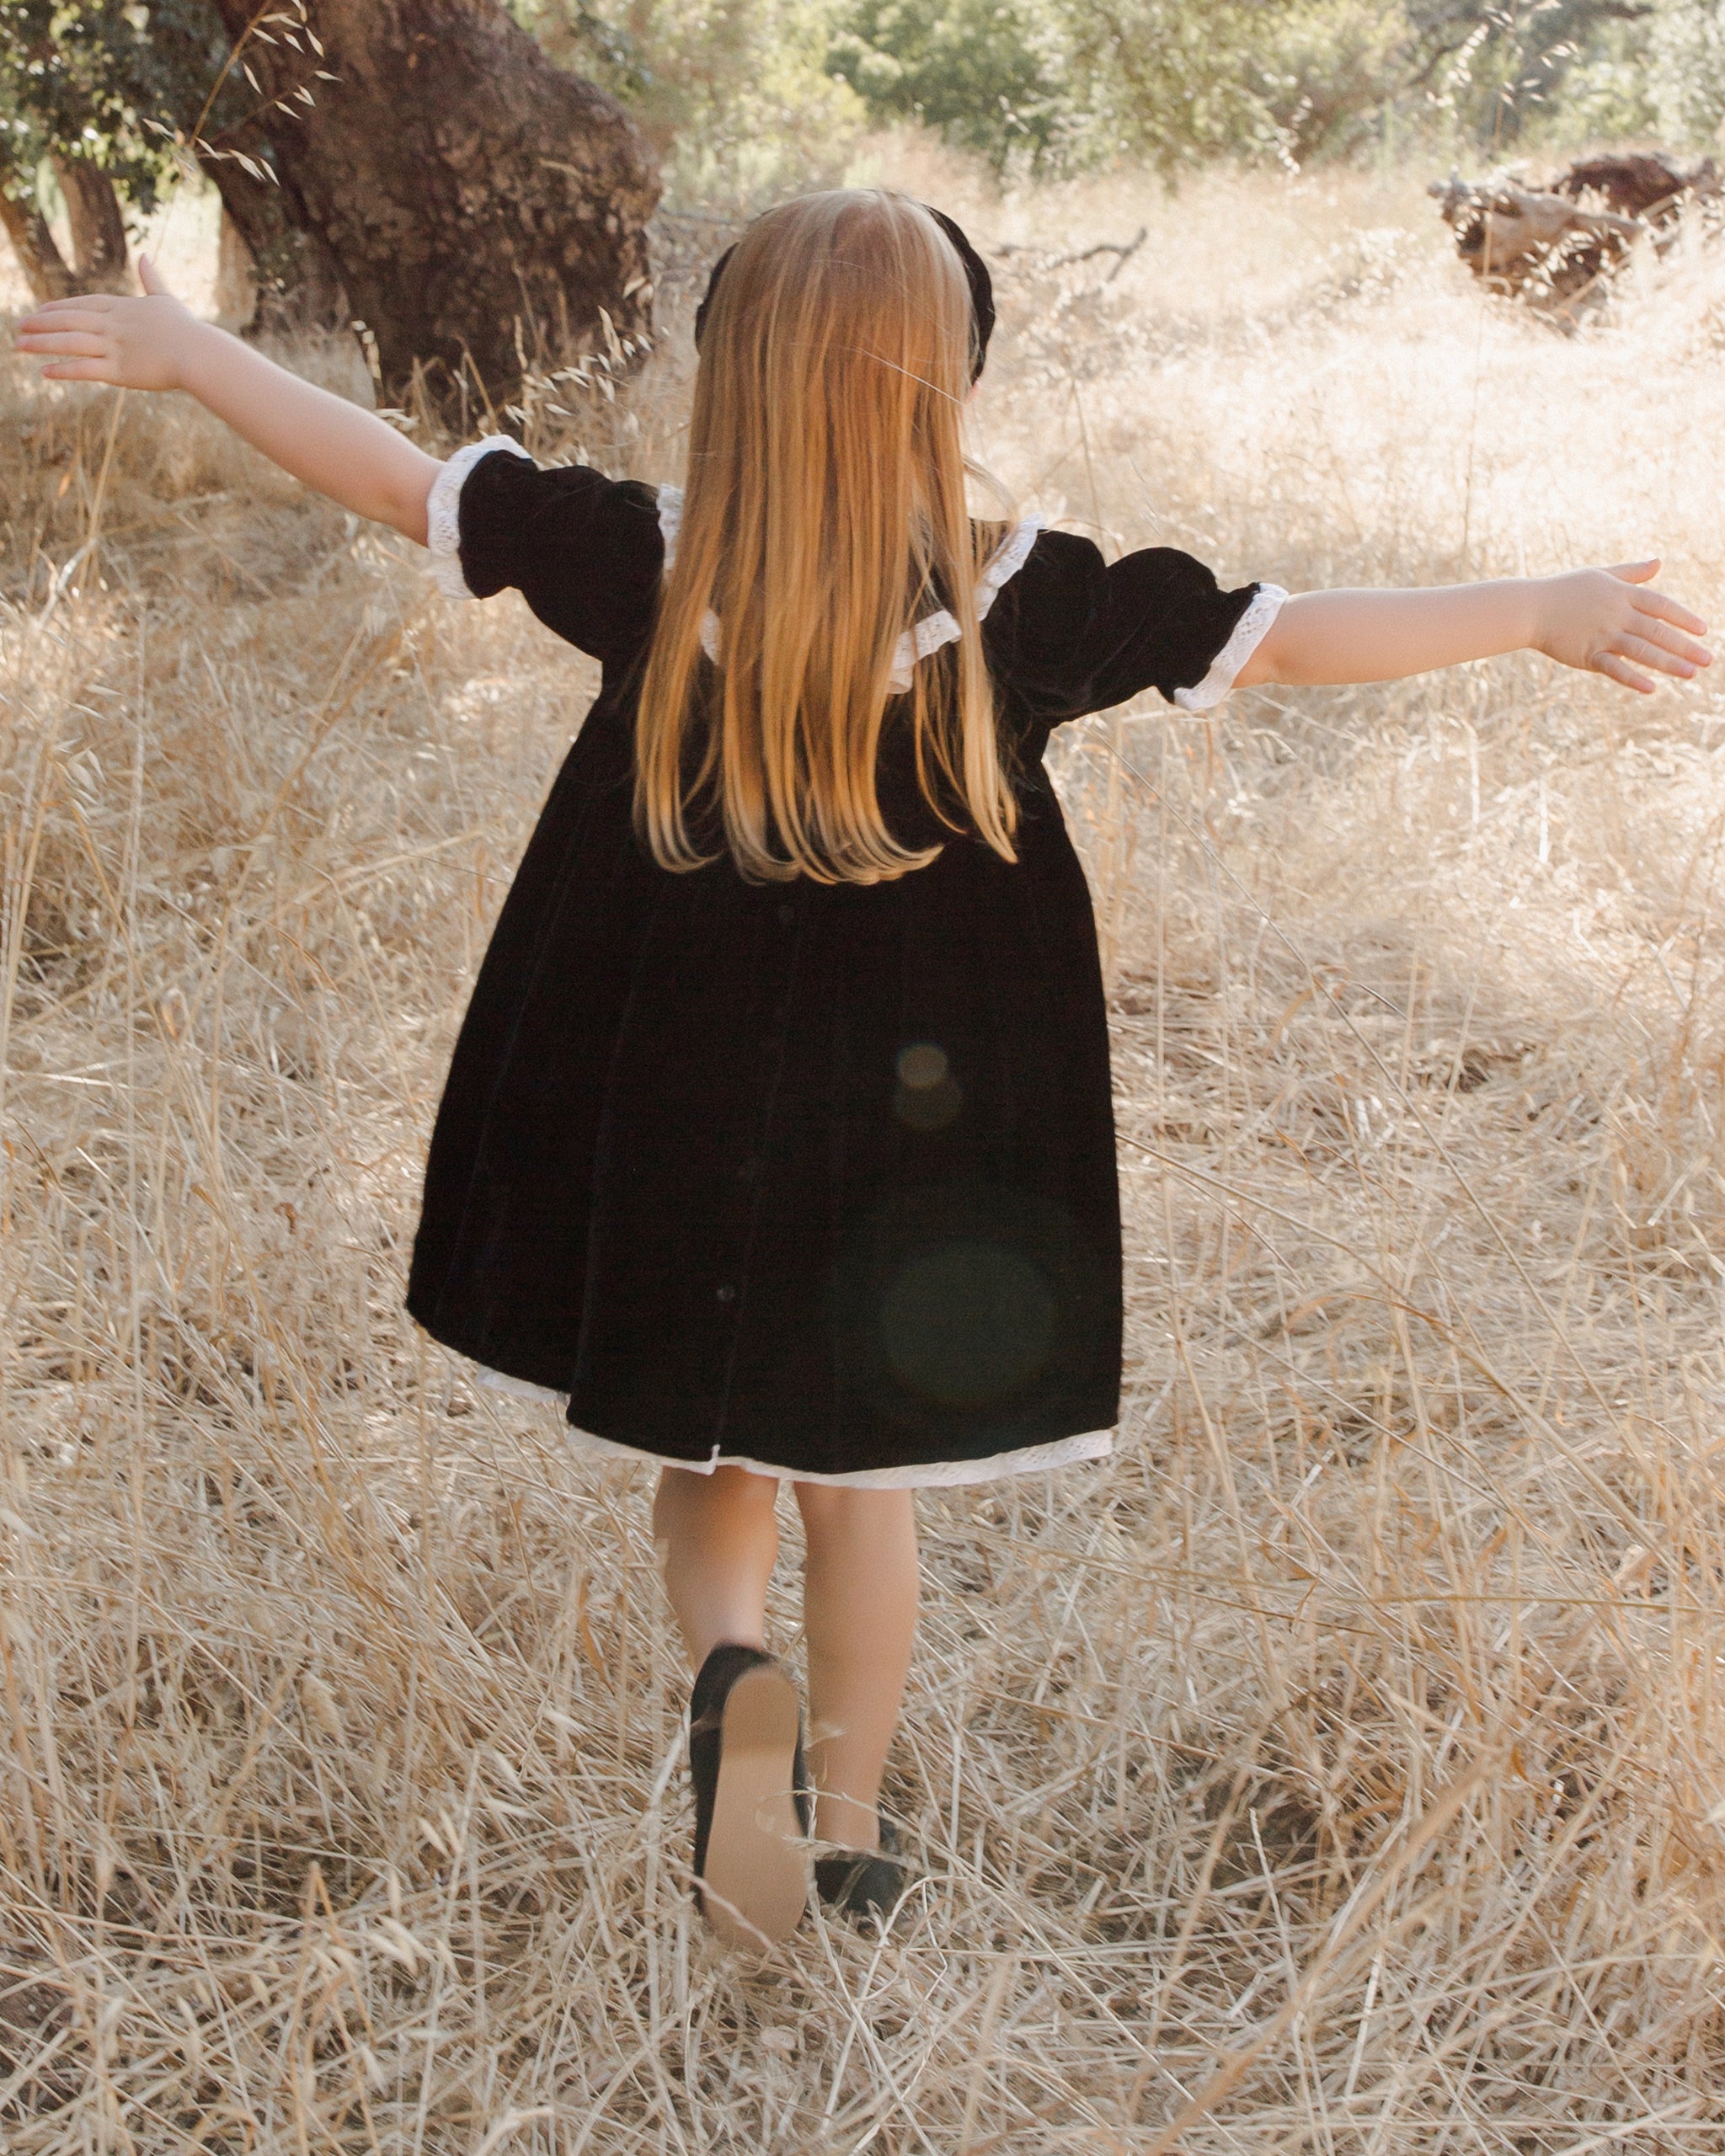 Amelia Dress || Black - Rylee + Cru | Kids Clothes | Trendy Baby Clothes | Modern Infant Outfits |